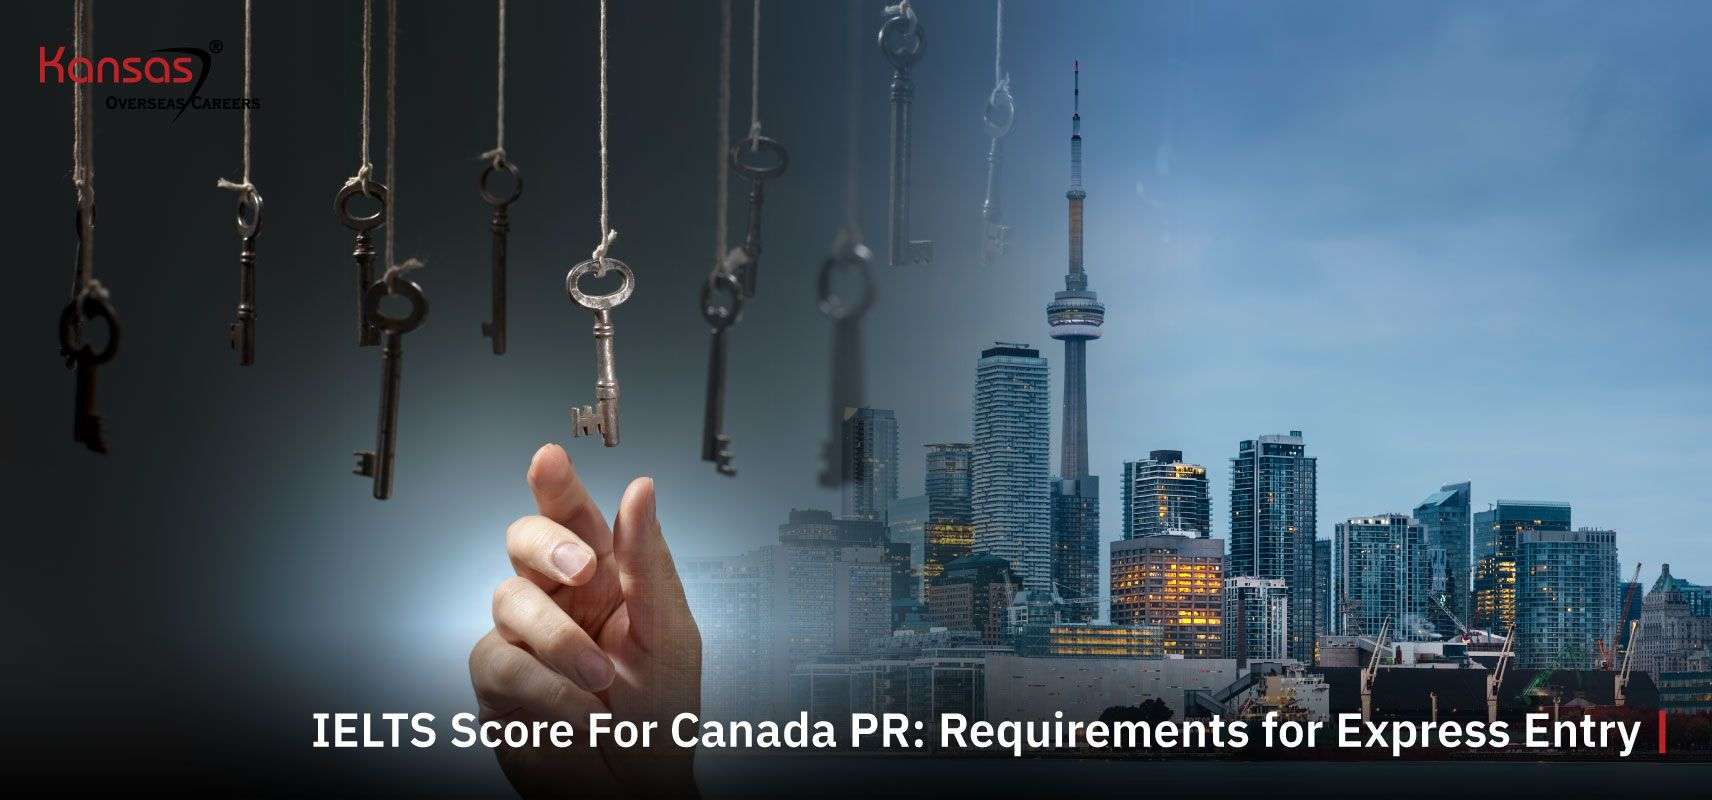 ielts-score-for-canada-pr-requirements-for-express-entry